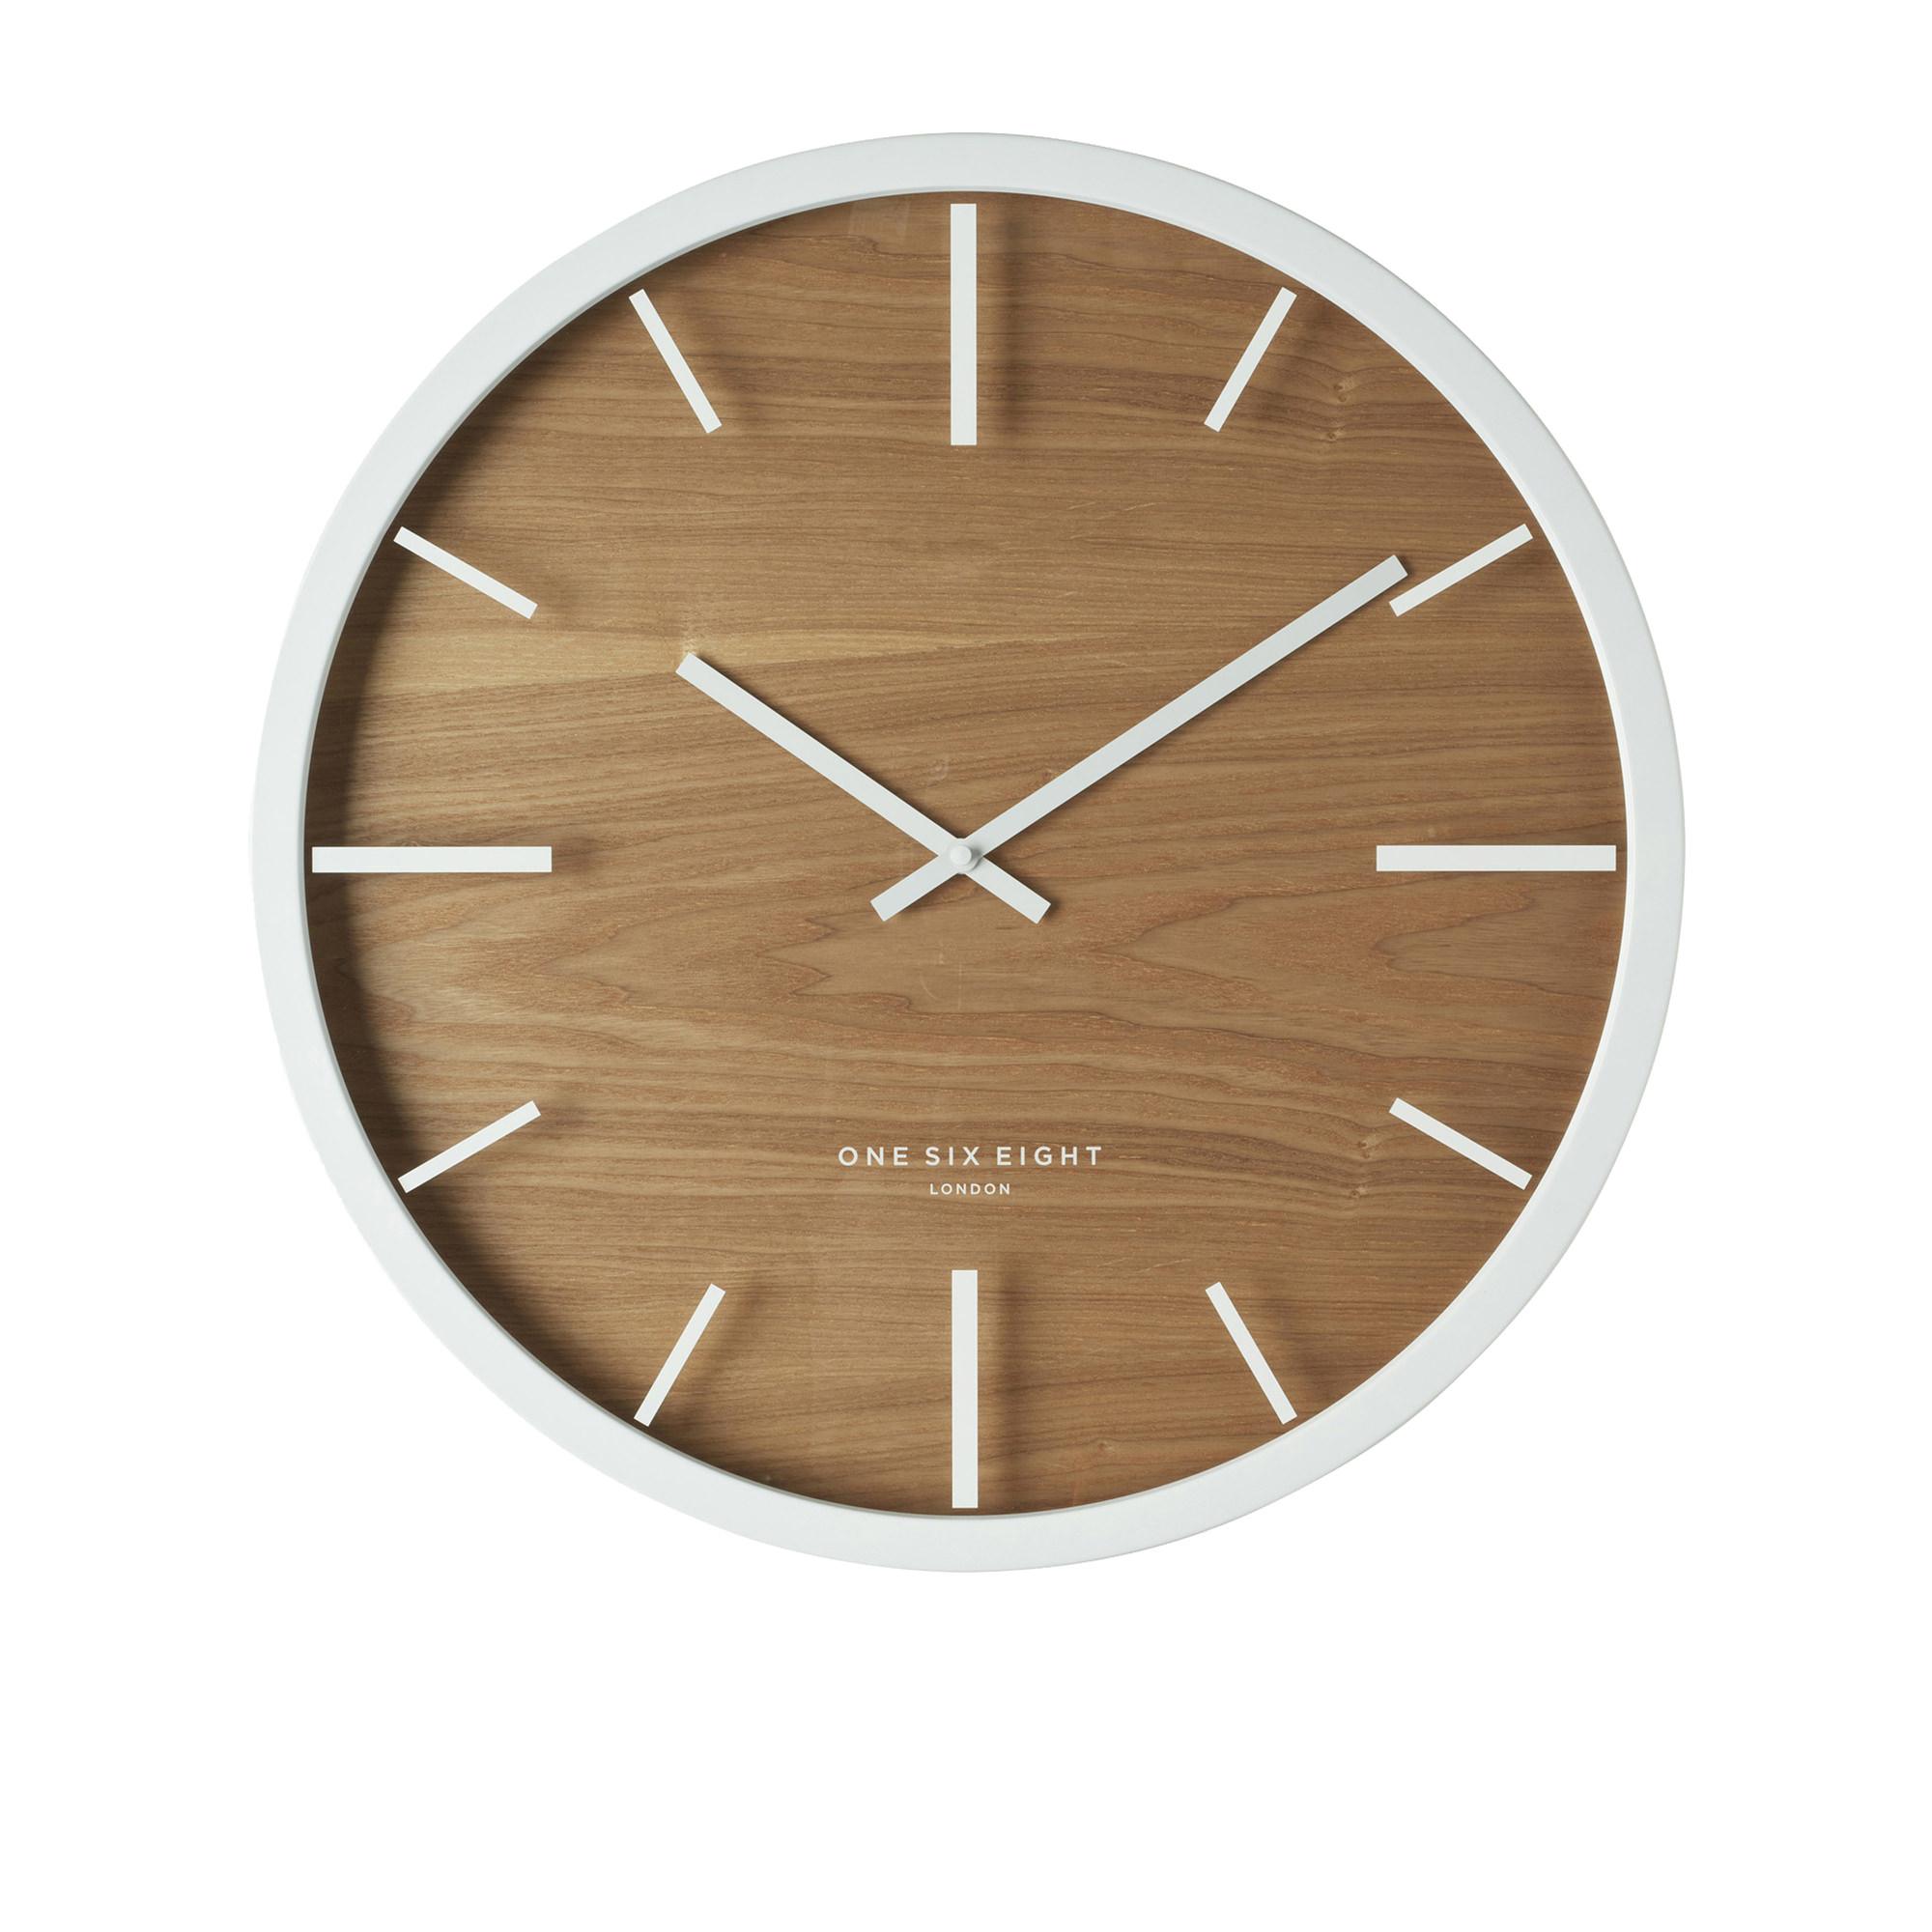 One Six Eight London Willow Silent Wall Clock 50cm White Image 1